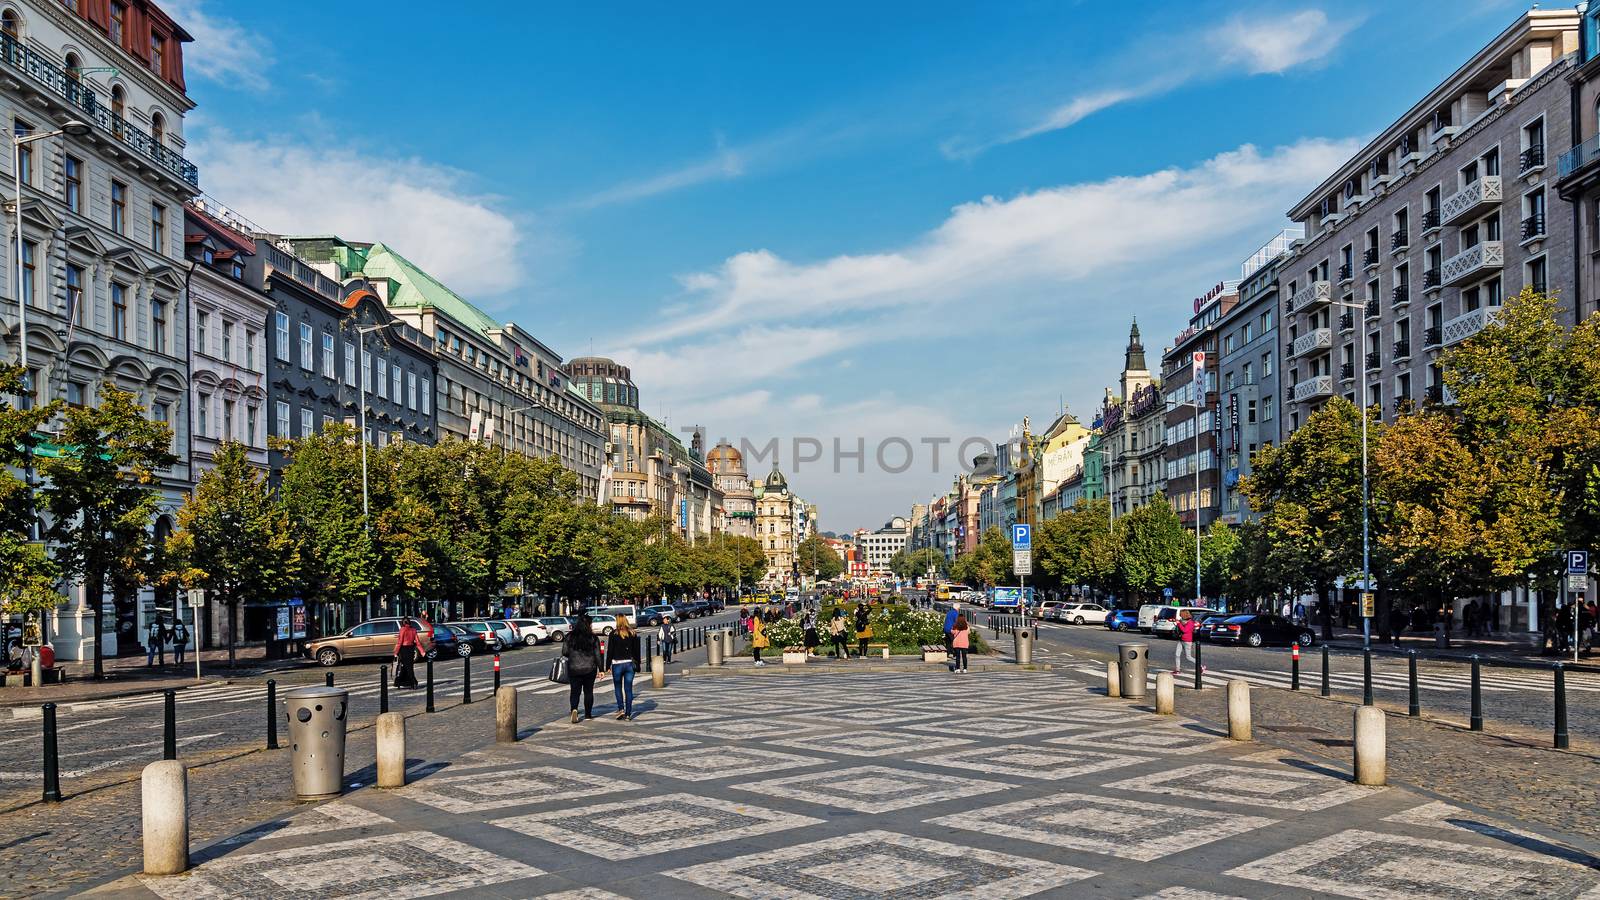 Overall view of Wenceslas Square (Czech: Vaclavske namesti) in Prague, main city square, business and cultural center, named after Saint Wenceslas, the patron of Bohemia.